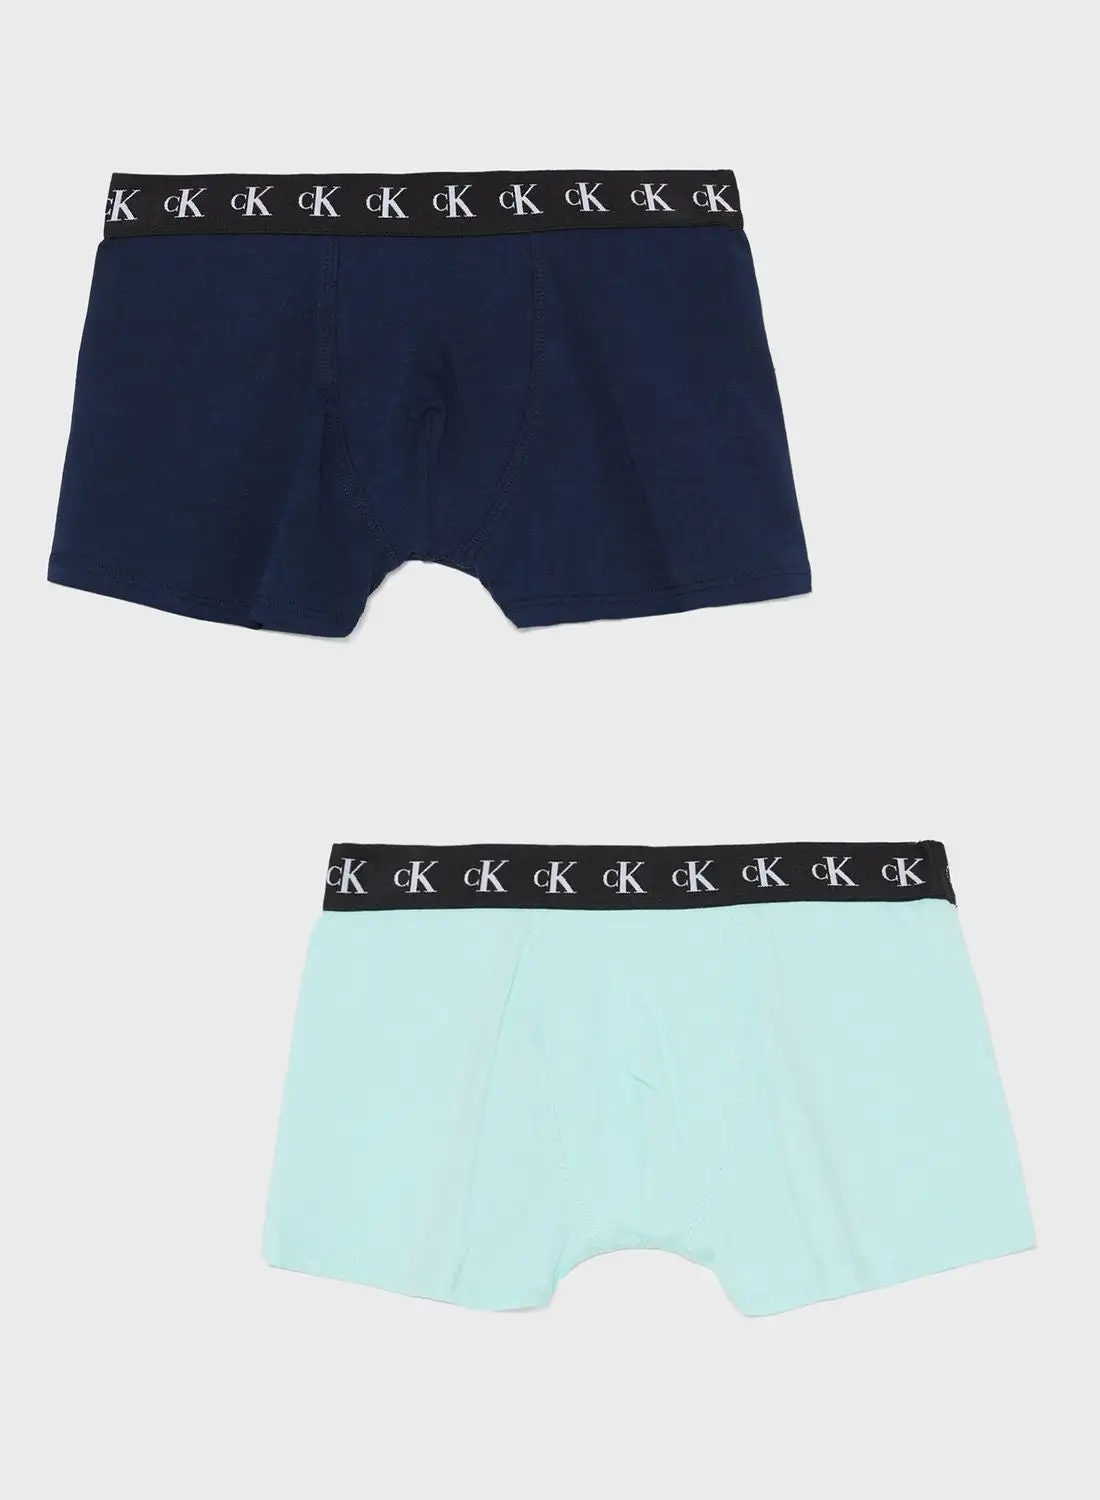 CALVIN KLEIN Youth 2 Pack Assorted Trunks